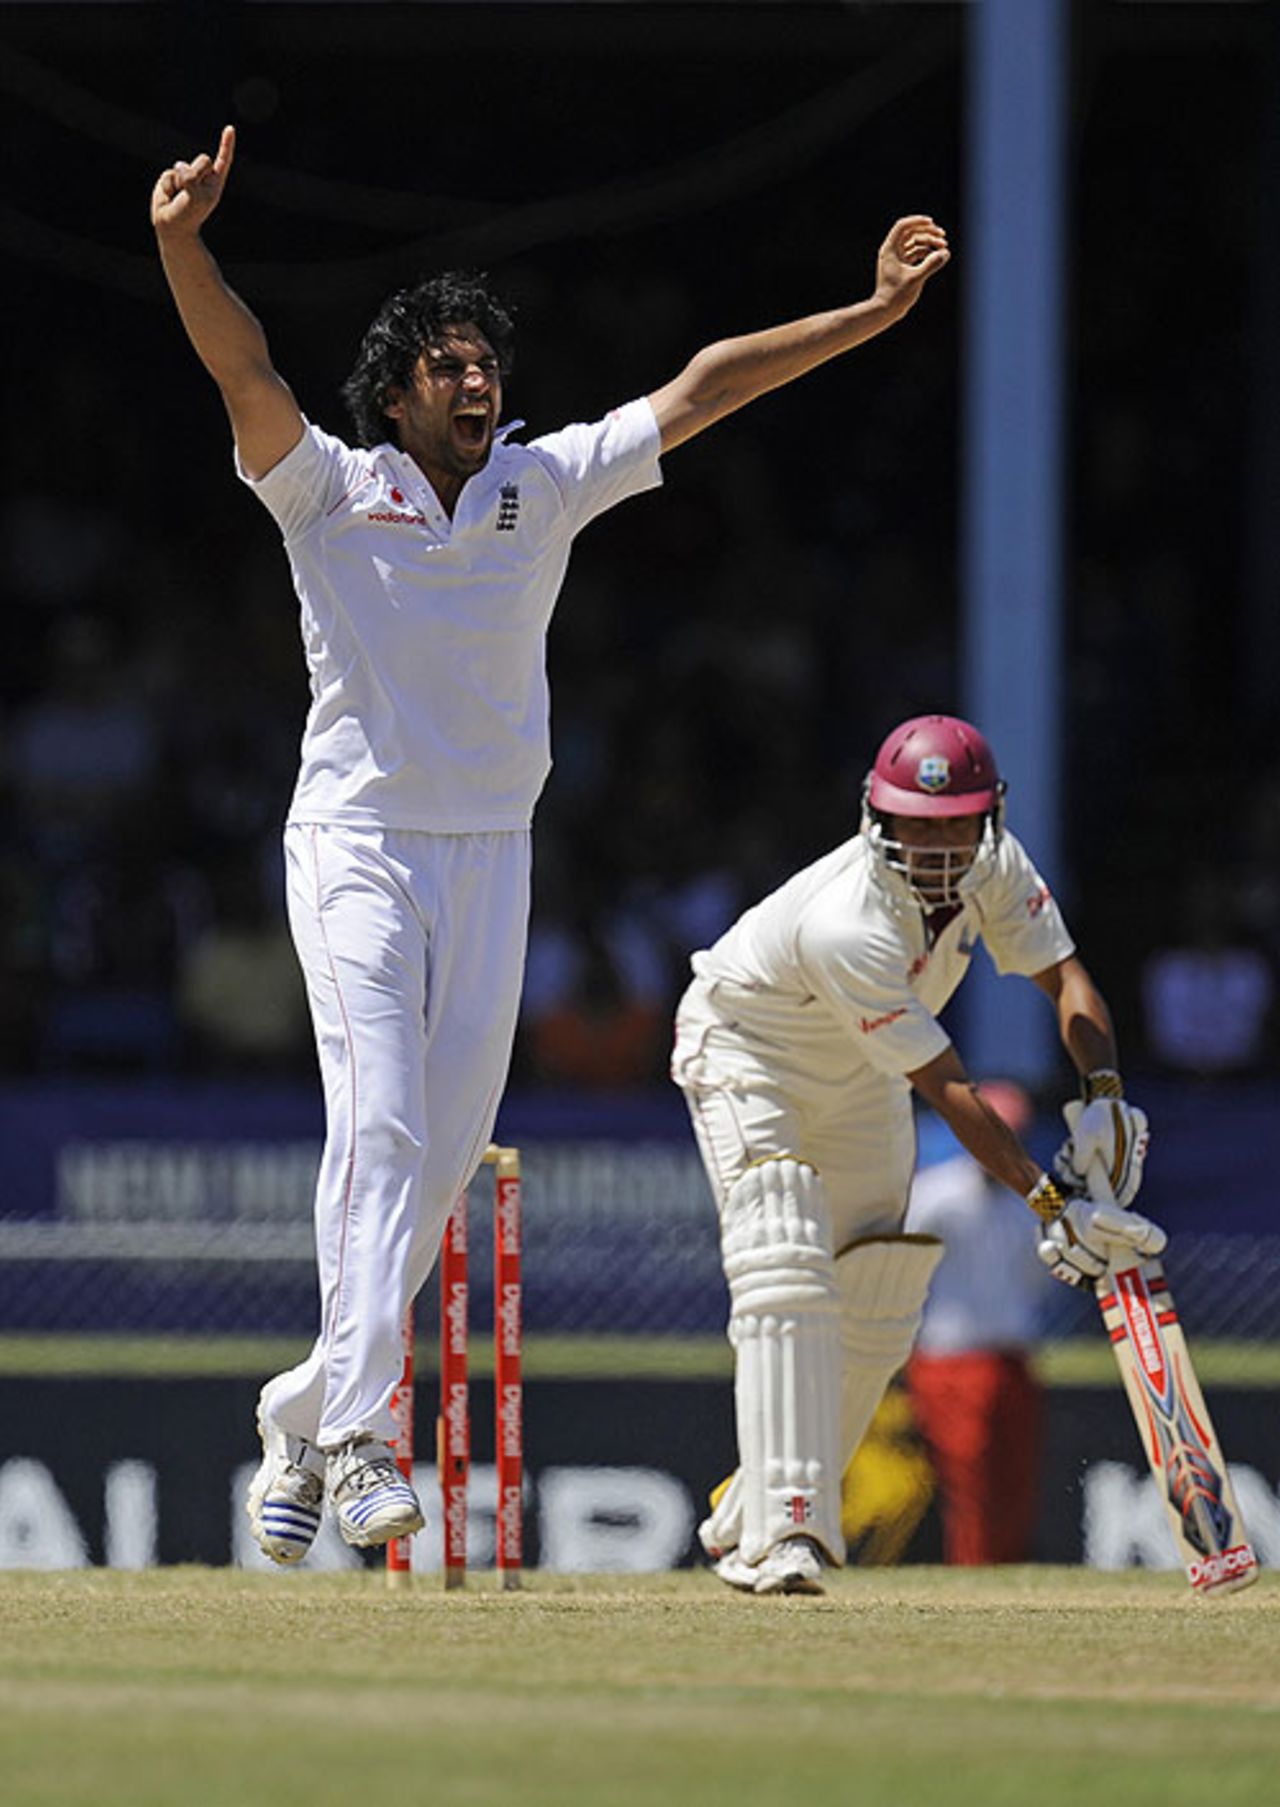 Amjad Khan celebrates his first Test wicket as Ramnaresh Sarwan fails for the first time in the series, West Indies v England, 5th Test, Trinidad, March 8, 2009